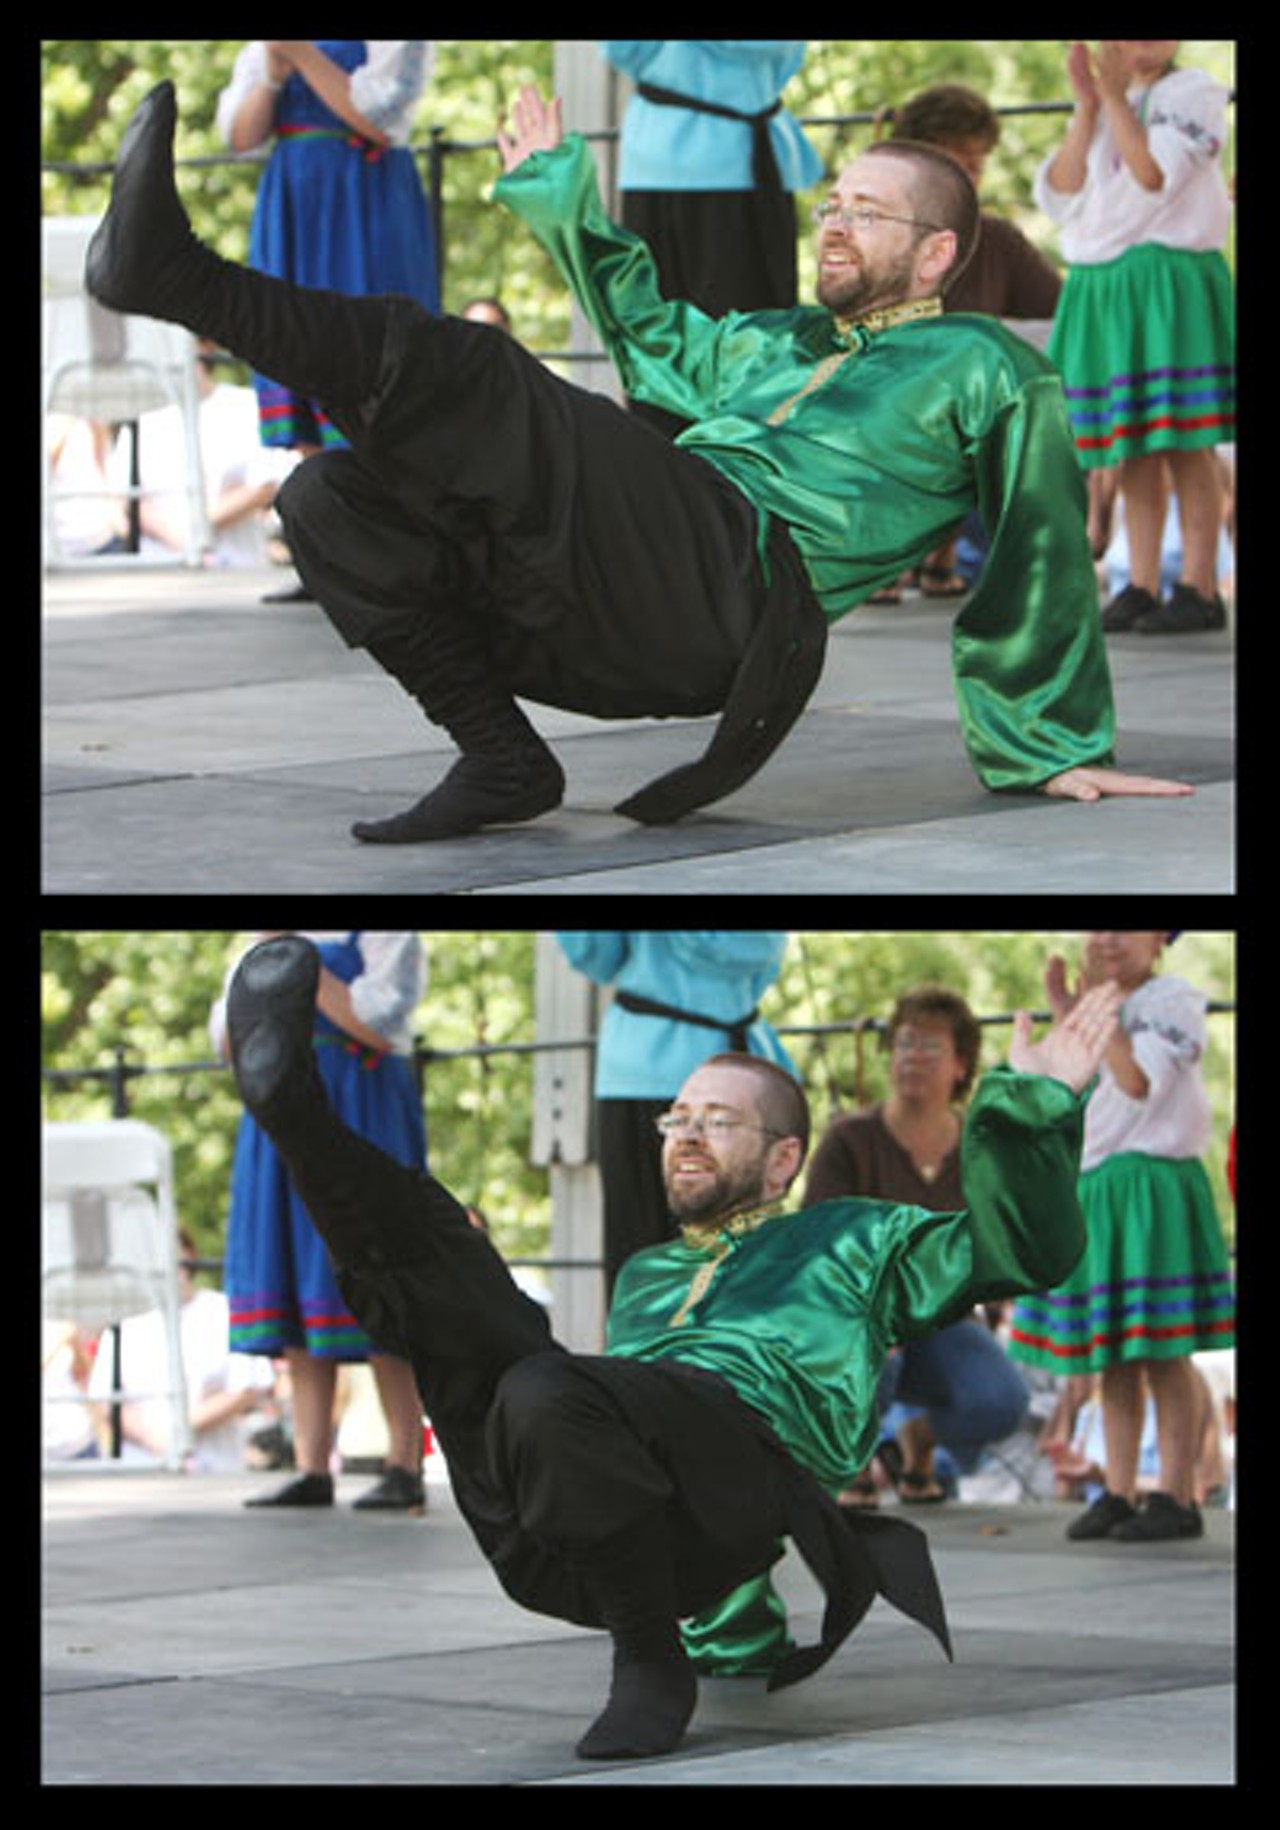 A Russian Cossack Dancer doing his best in the Hopak Challenge Dance, a Russian Dance contest to determine who can out dance one another.